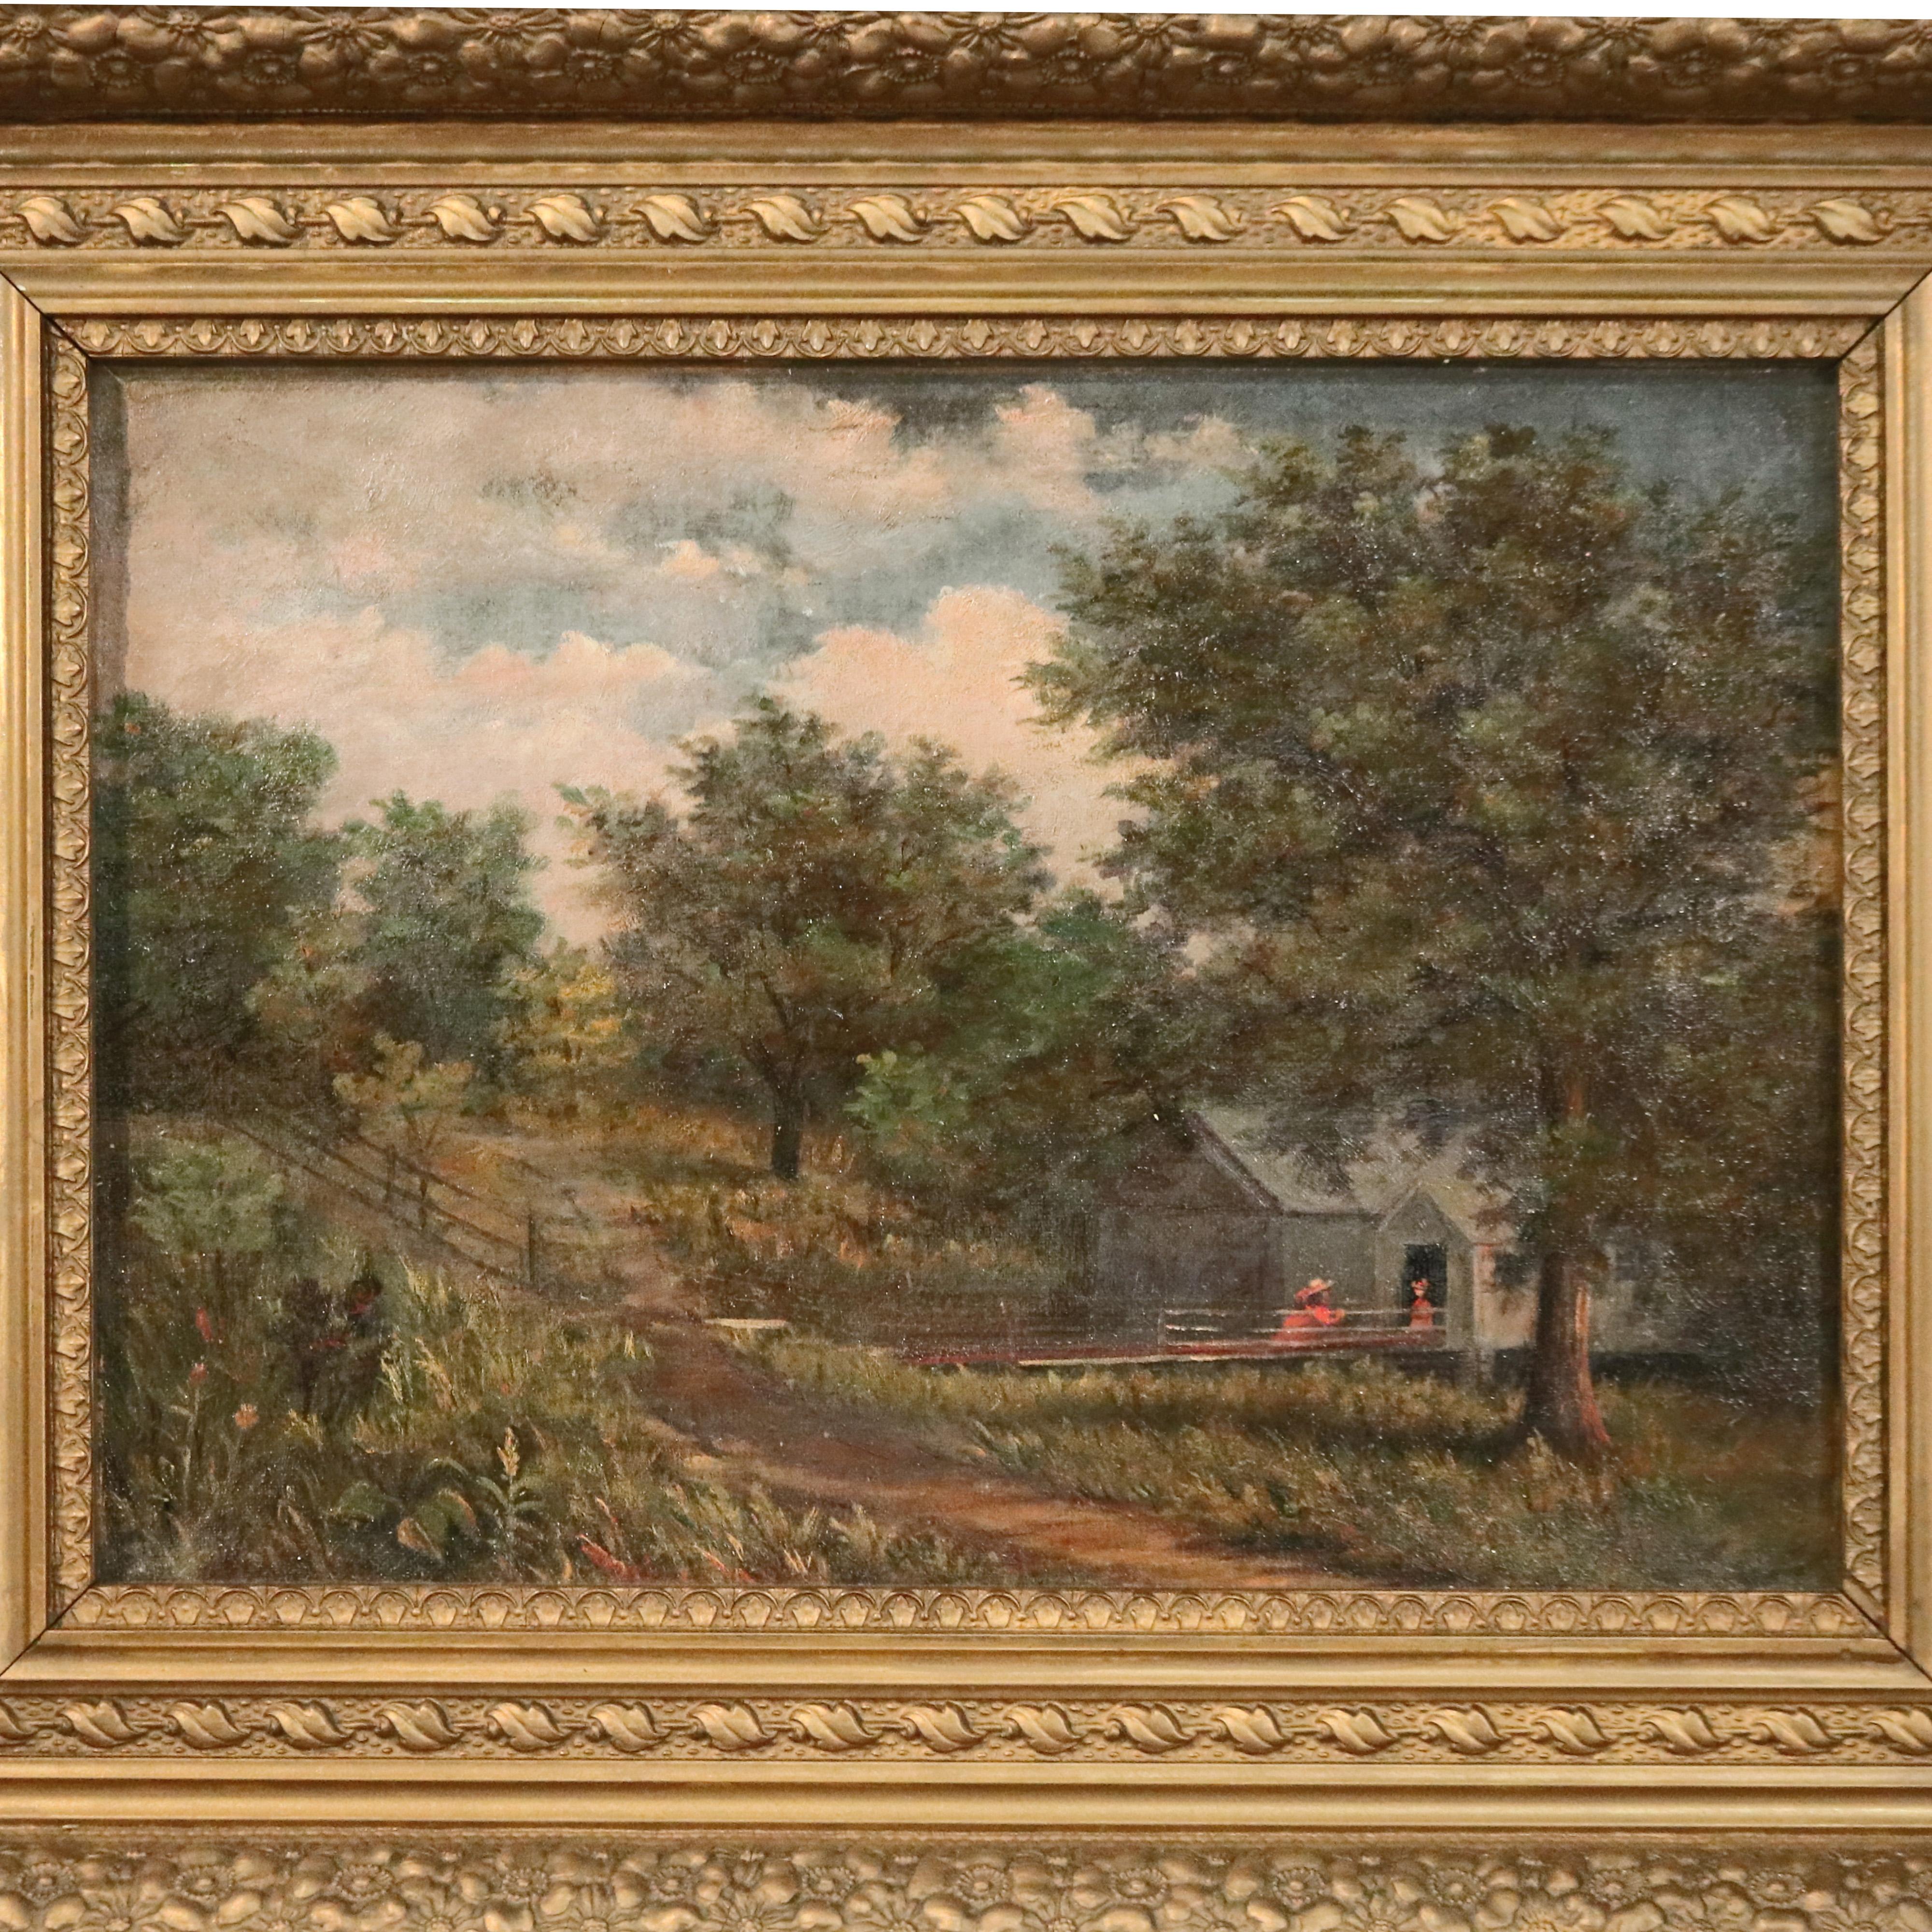 Hand-Painted Antique Hudson River School Landscape Oil Painting with Figures, Circa 1890